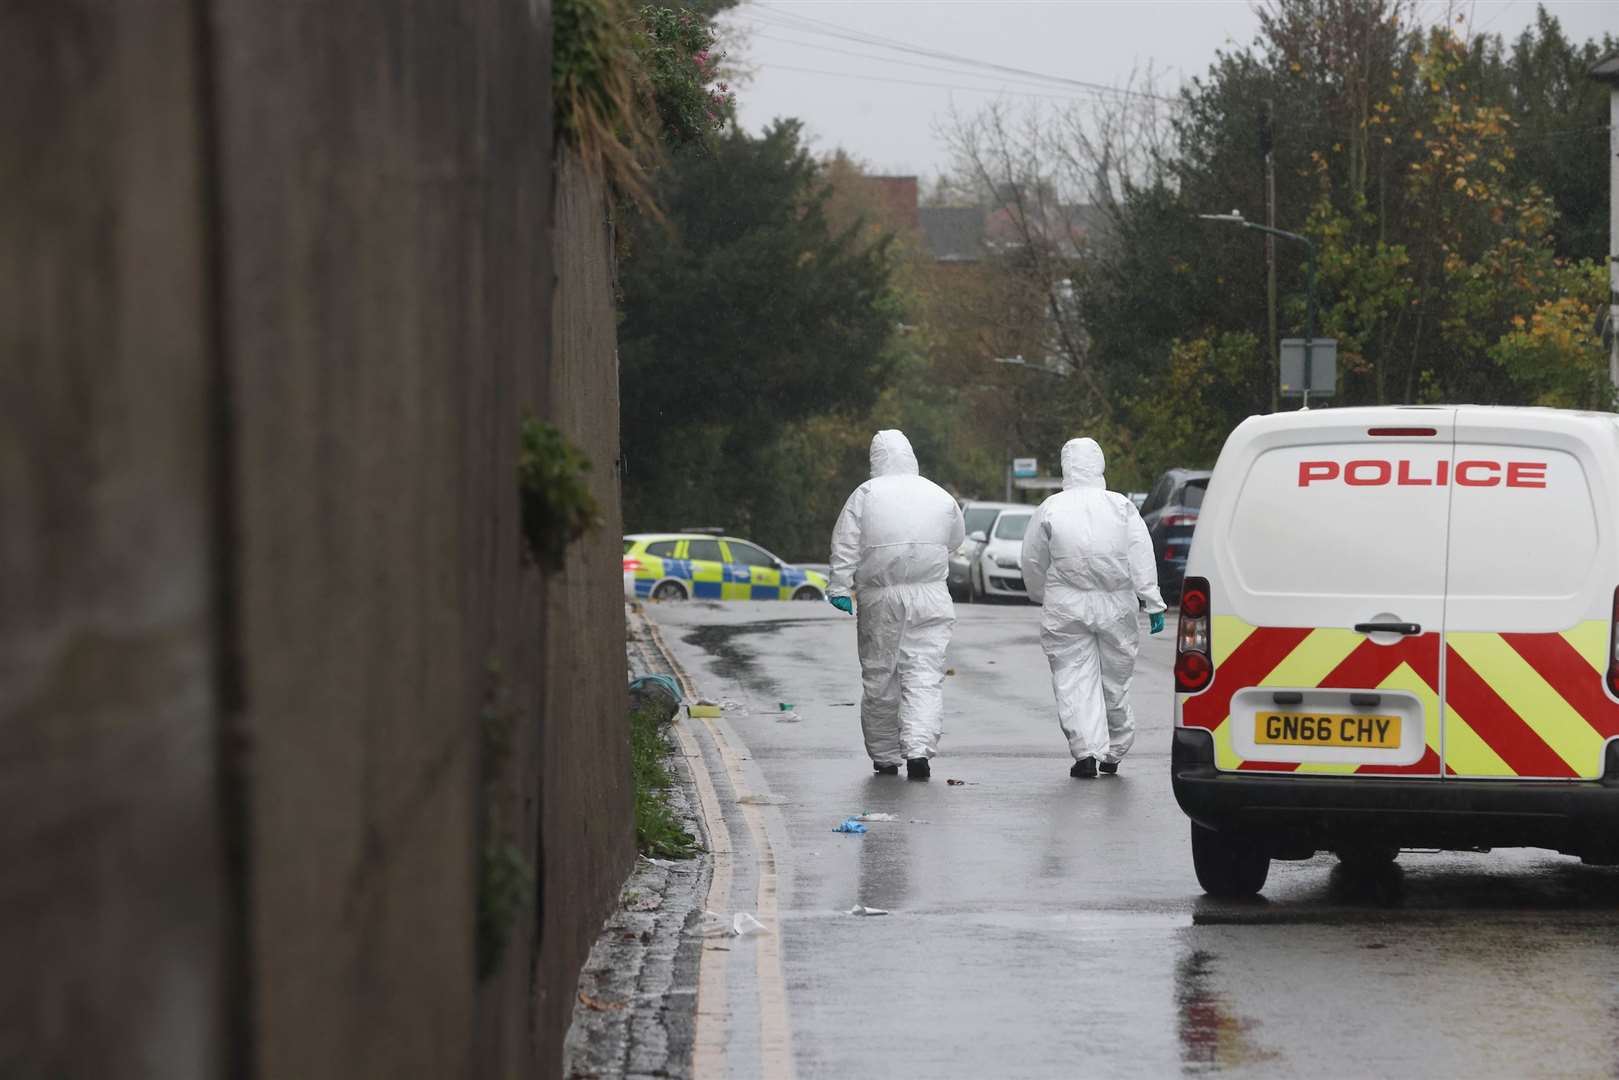 Forensic officers at the scene yesterday. Picture: UKNIP